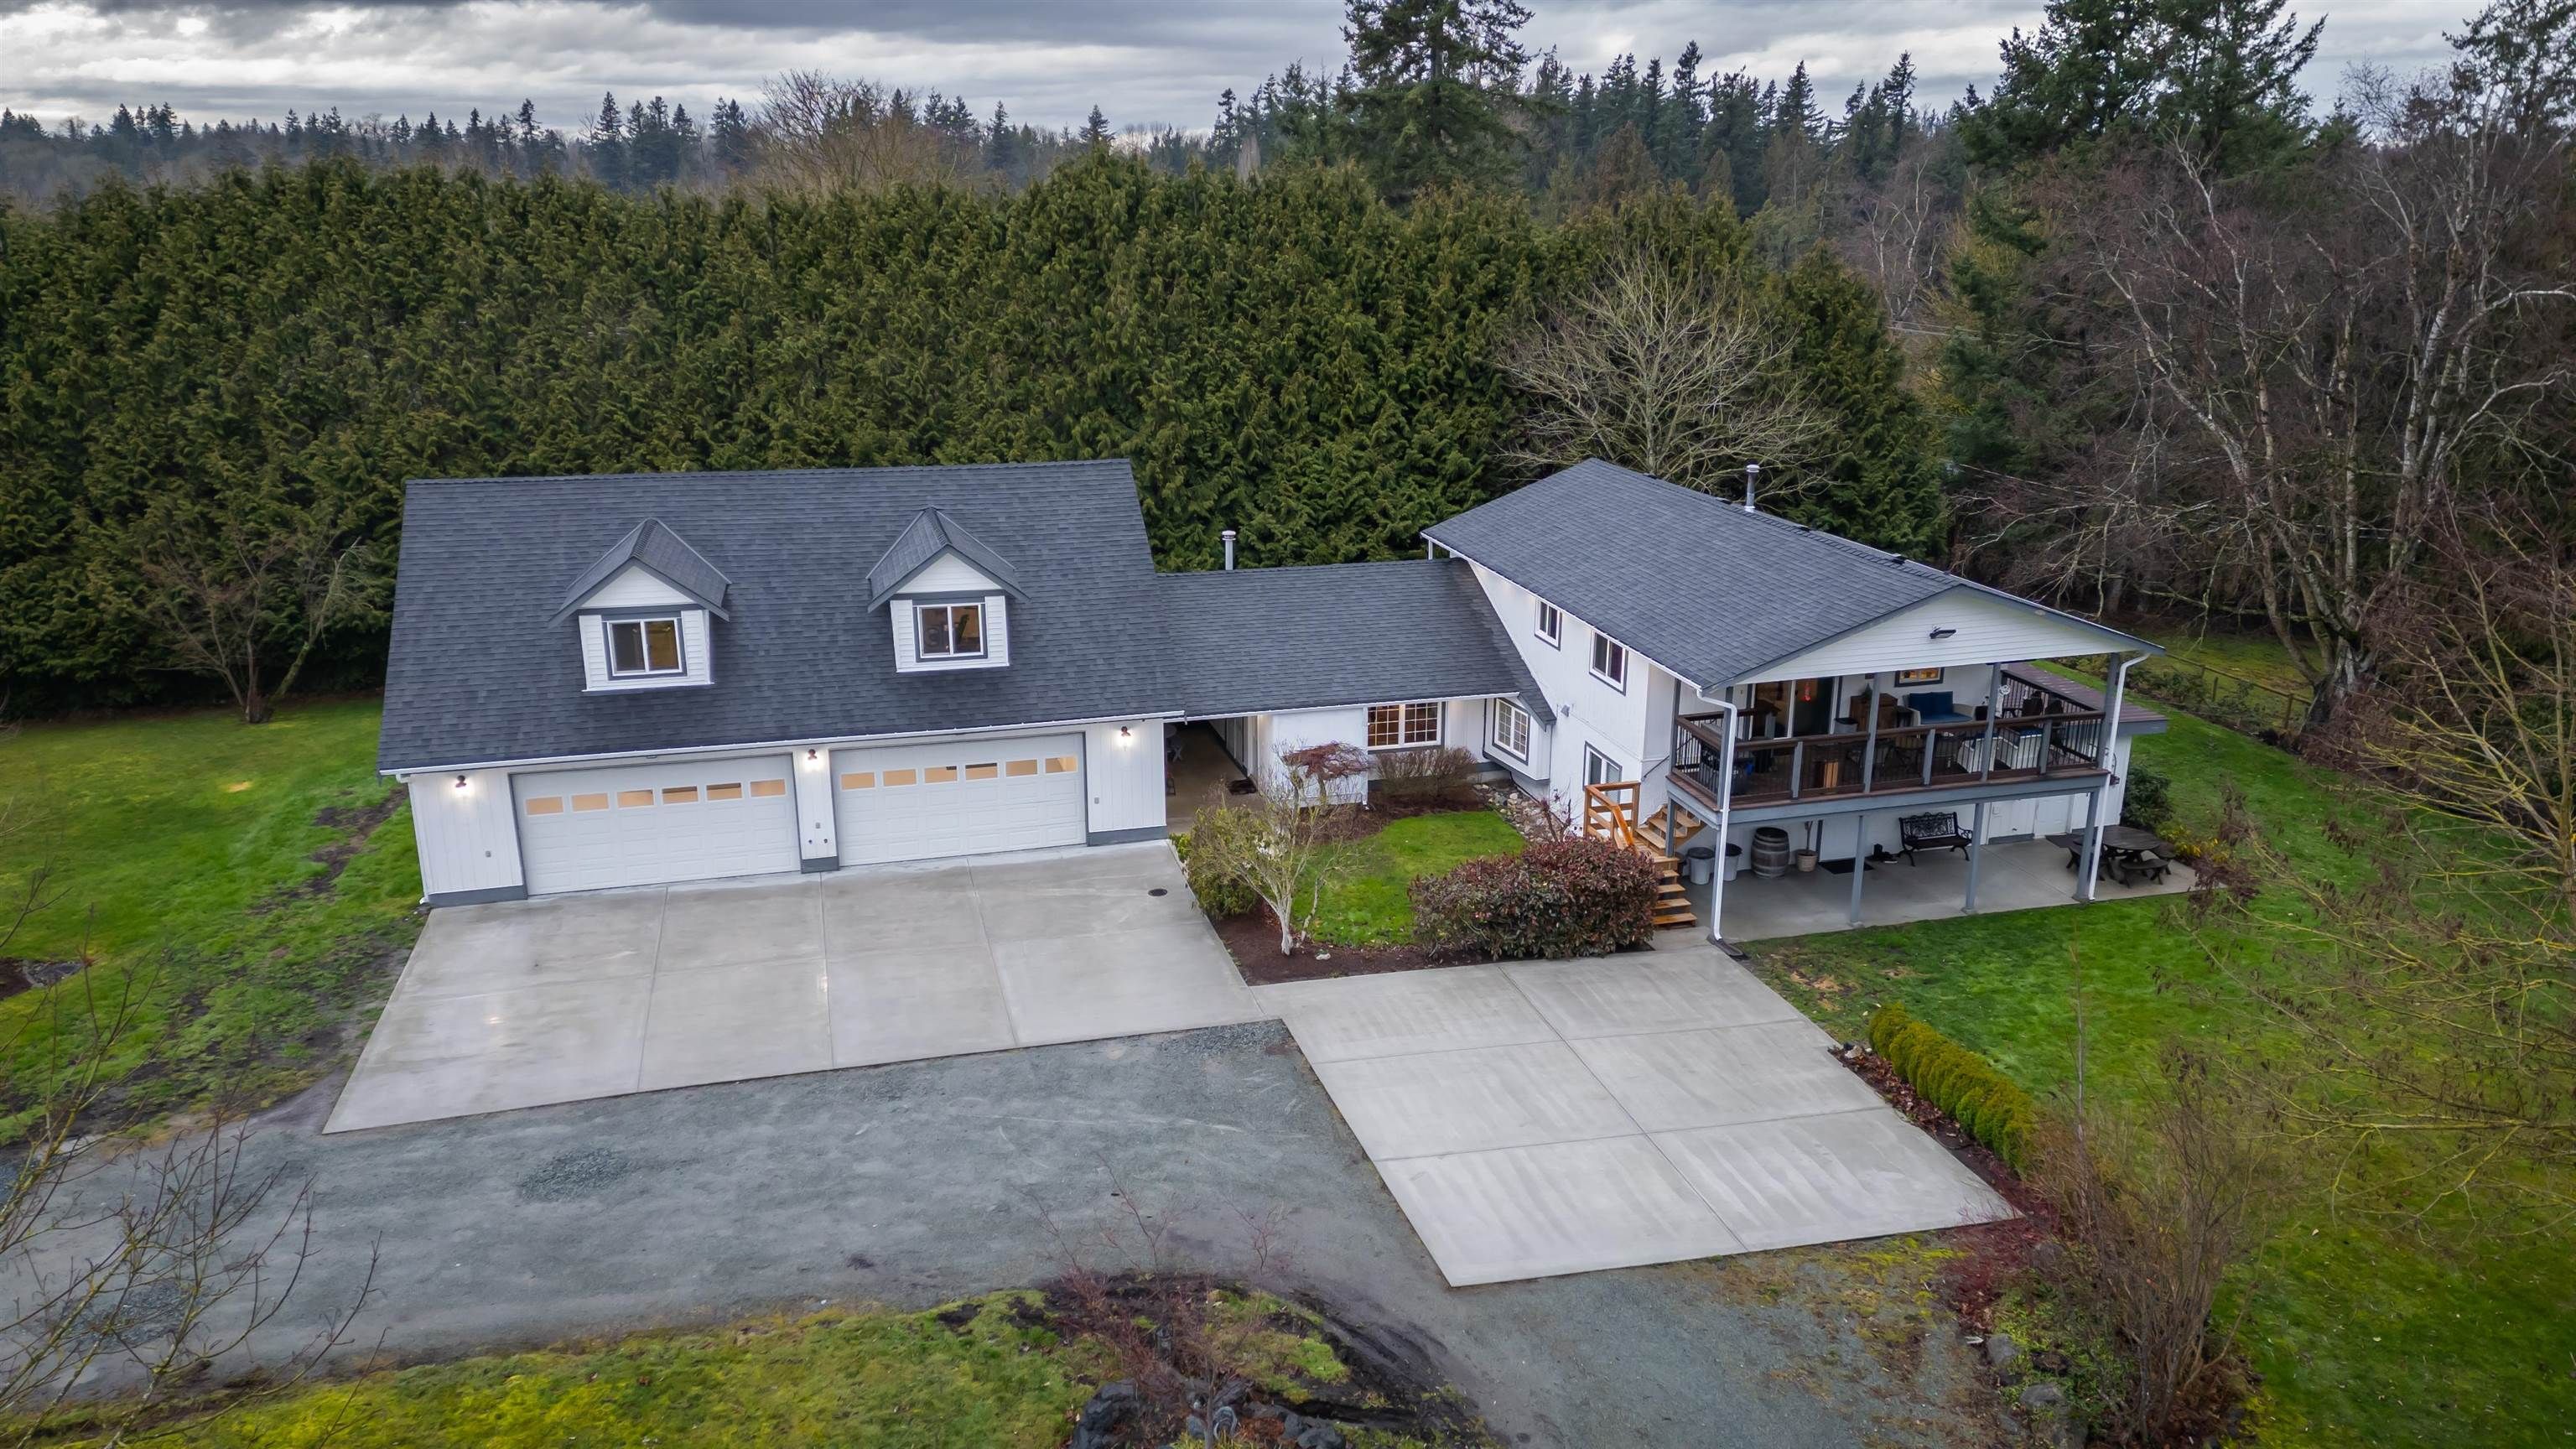 New property listed in Campbell Valley, Langley